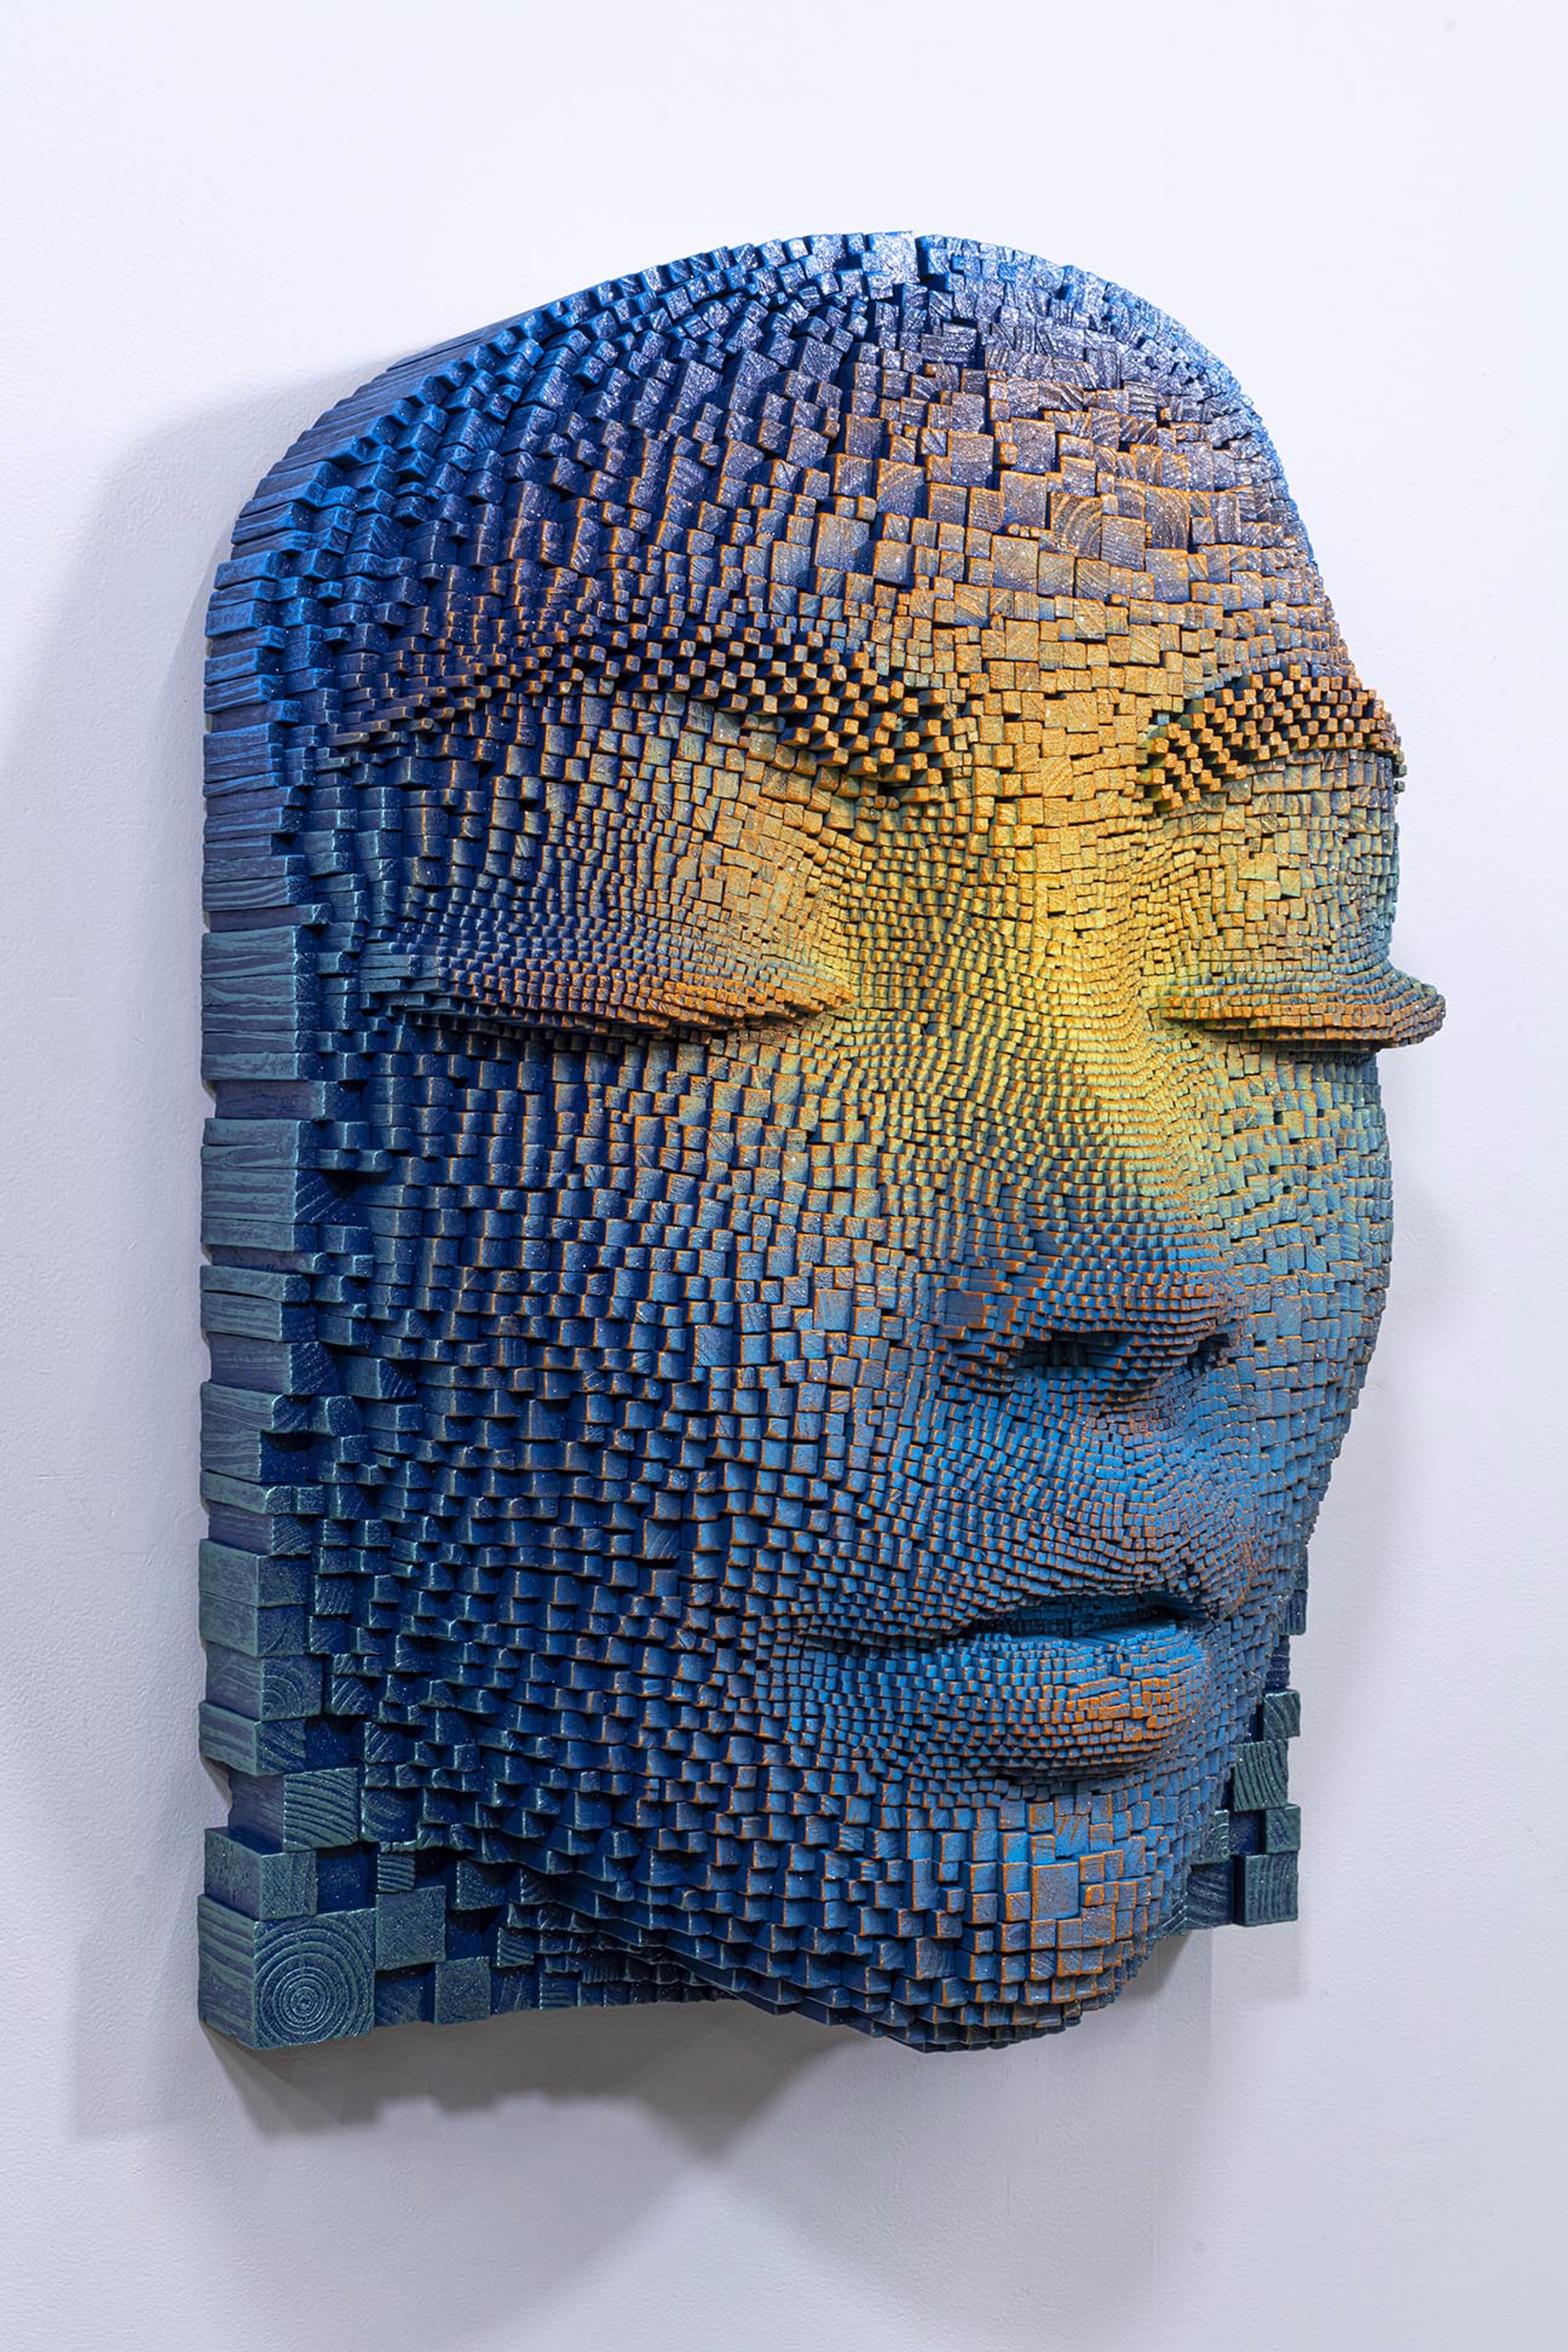 Getting Closer by Gil Bruvel